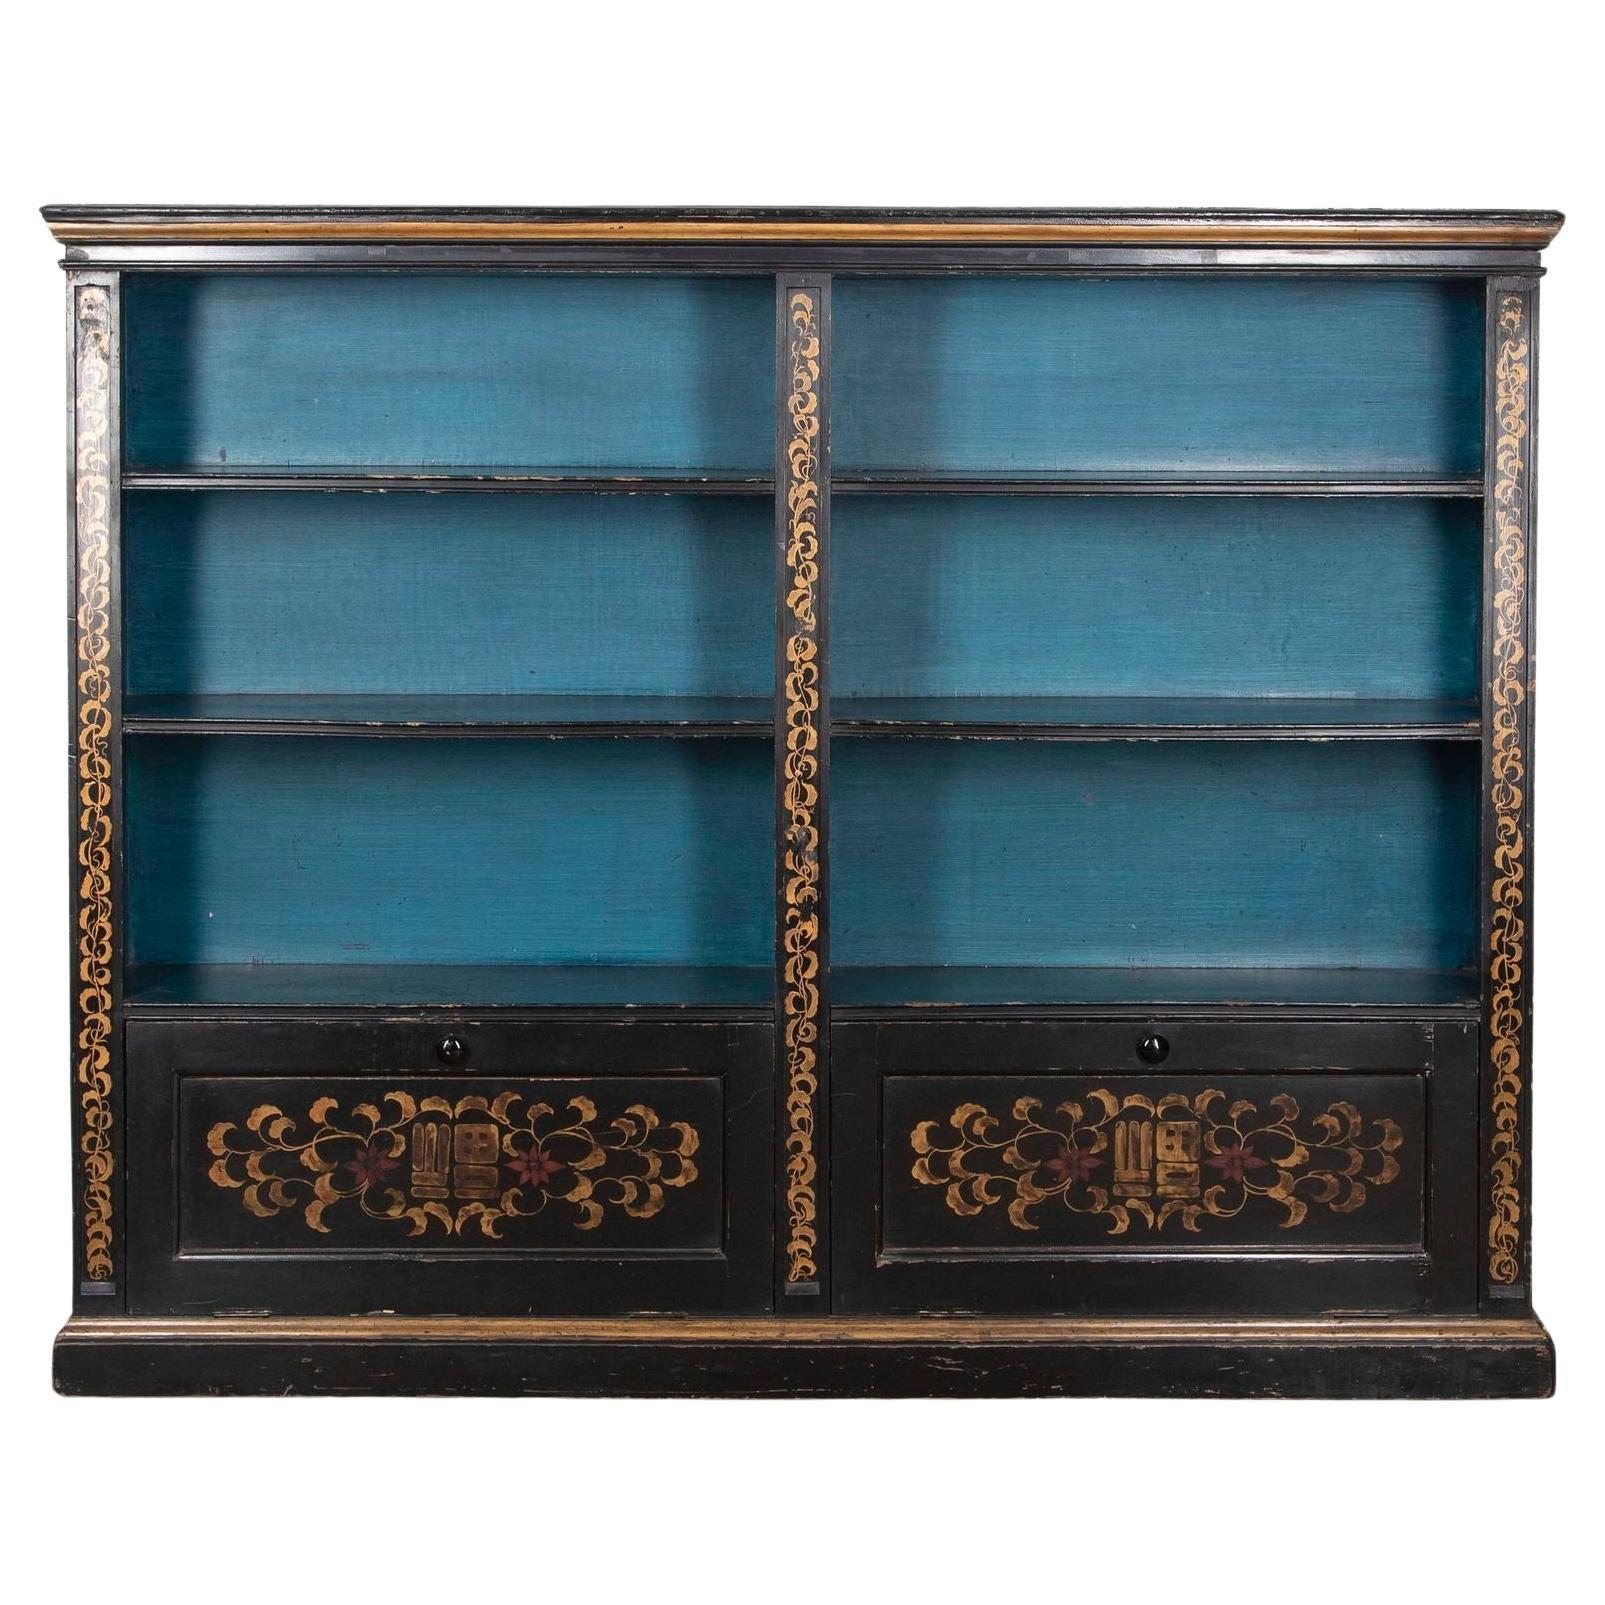 20th Century English Country House Bookcase